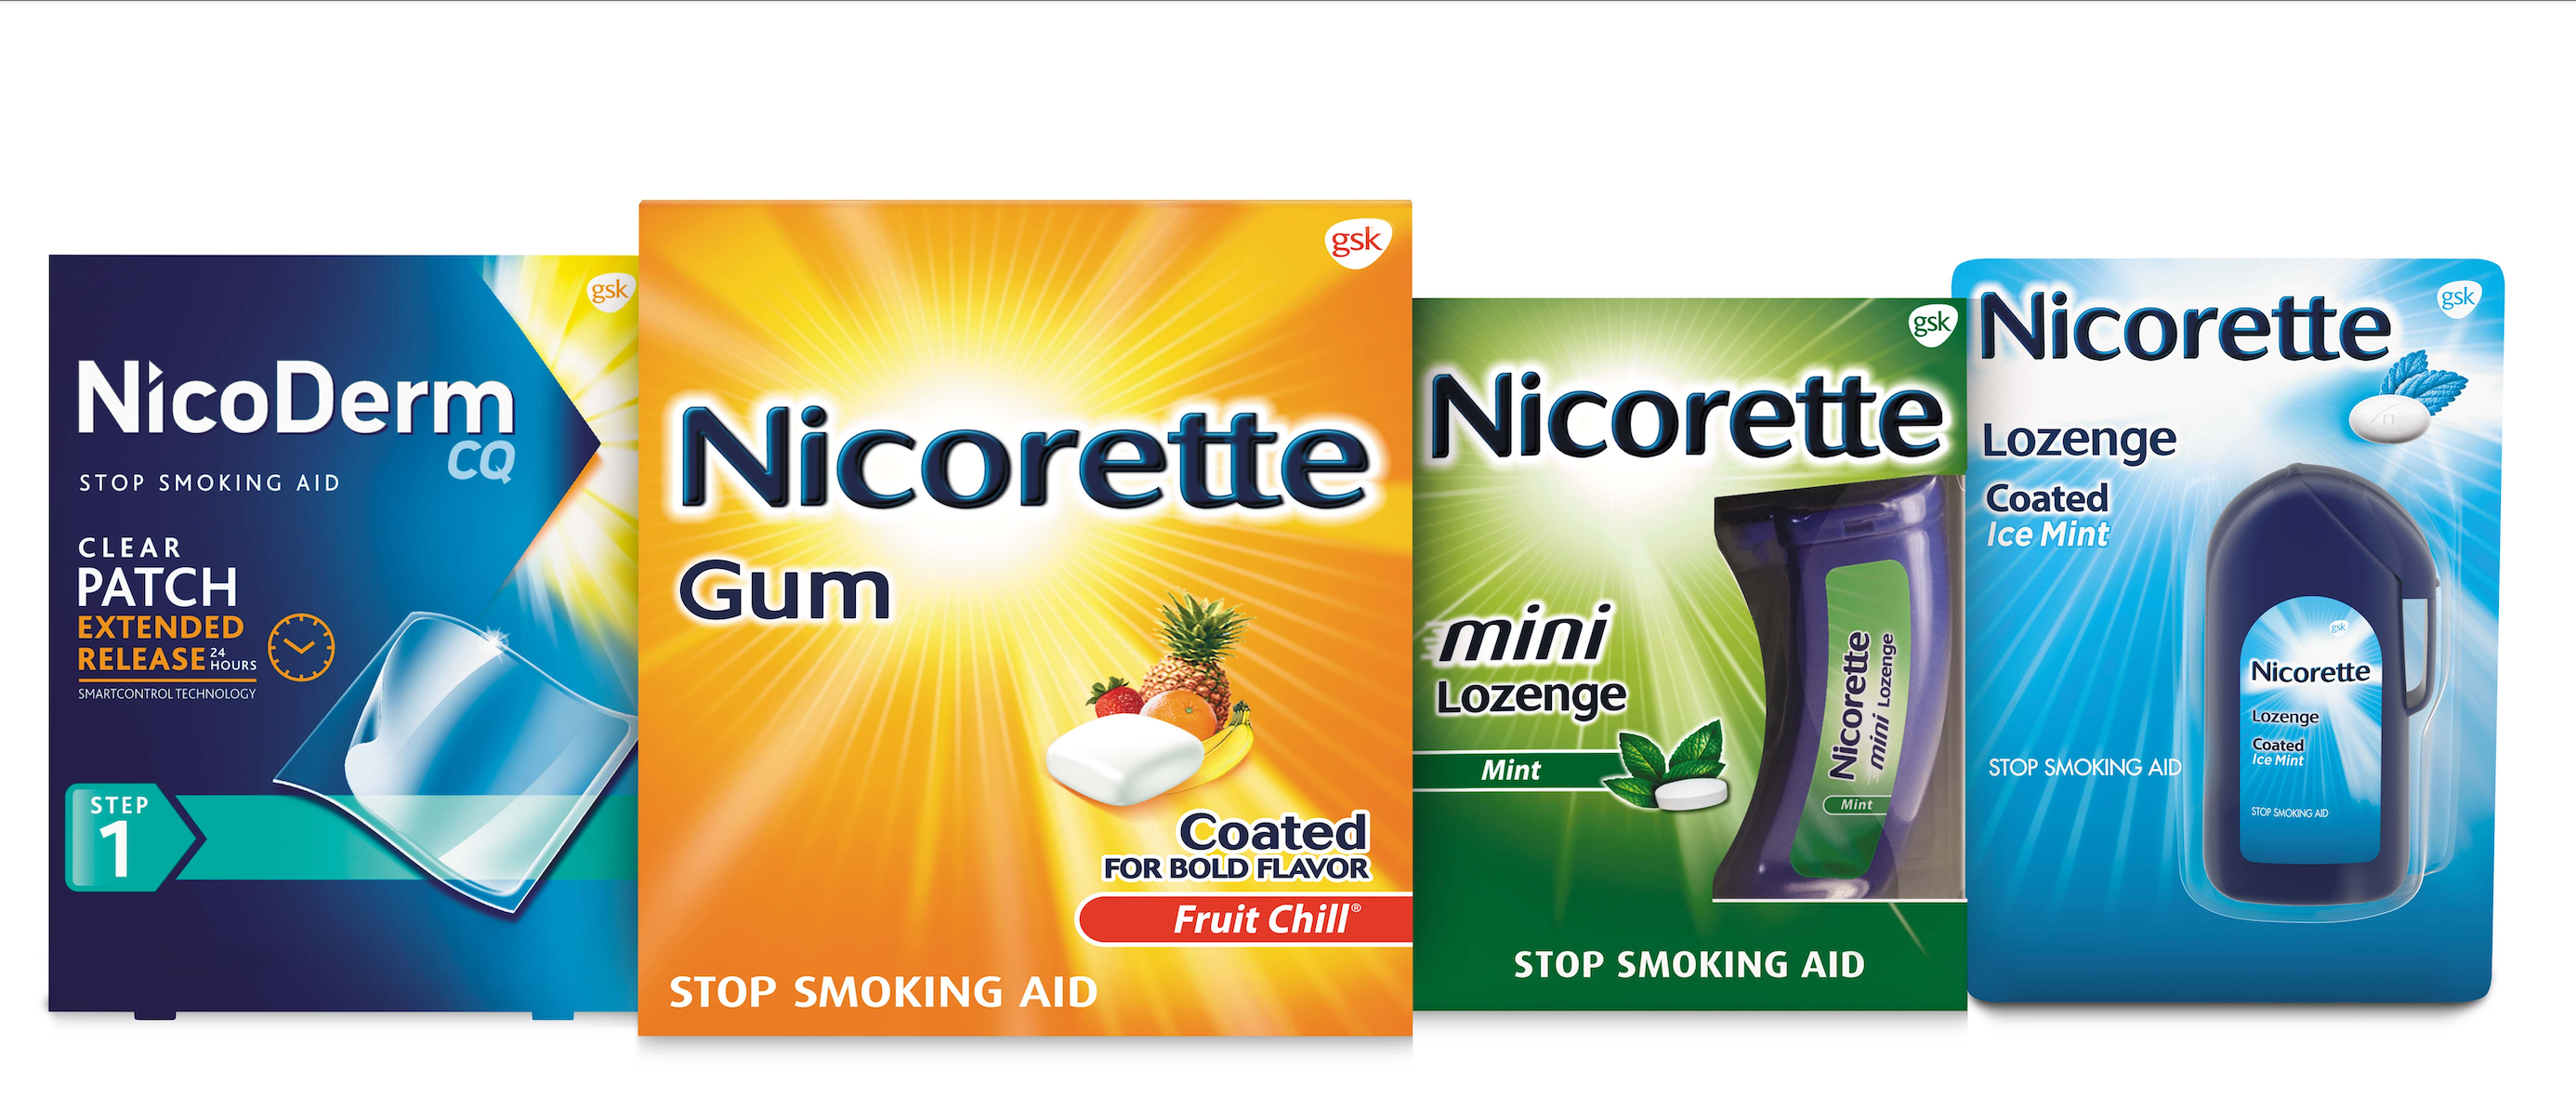 Nicorette and NicoDerm Introduce Master Brand Identity and Launch Updated Consumer Website to Better Support Smokers on Their Quit Journey